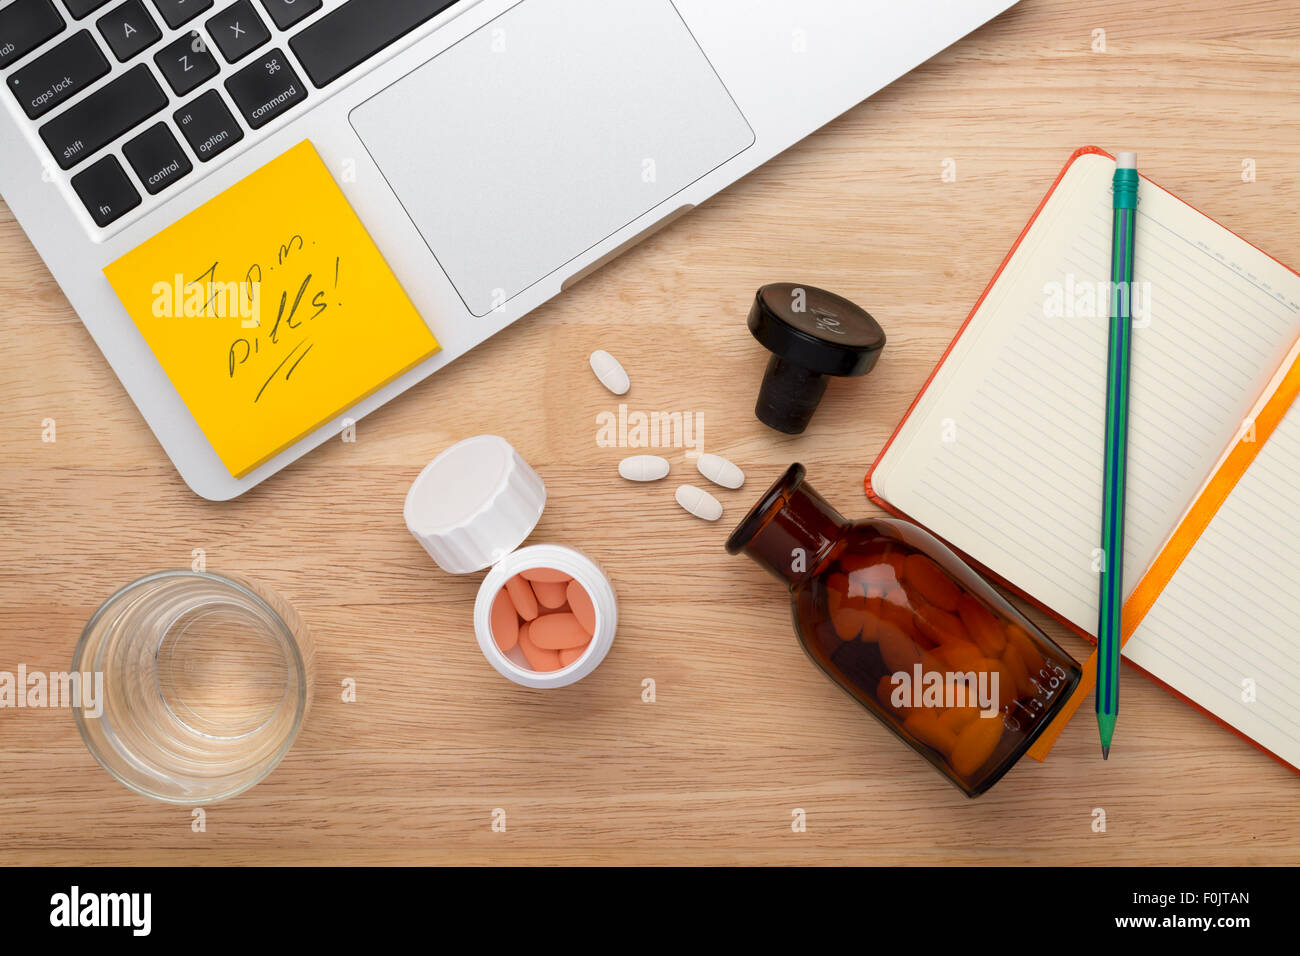 On-line treatment concept with bottles of medicine pills on the wooden table Stock Photo